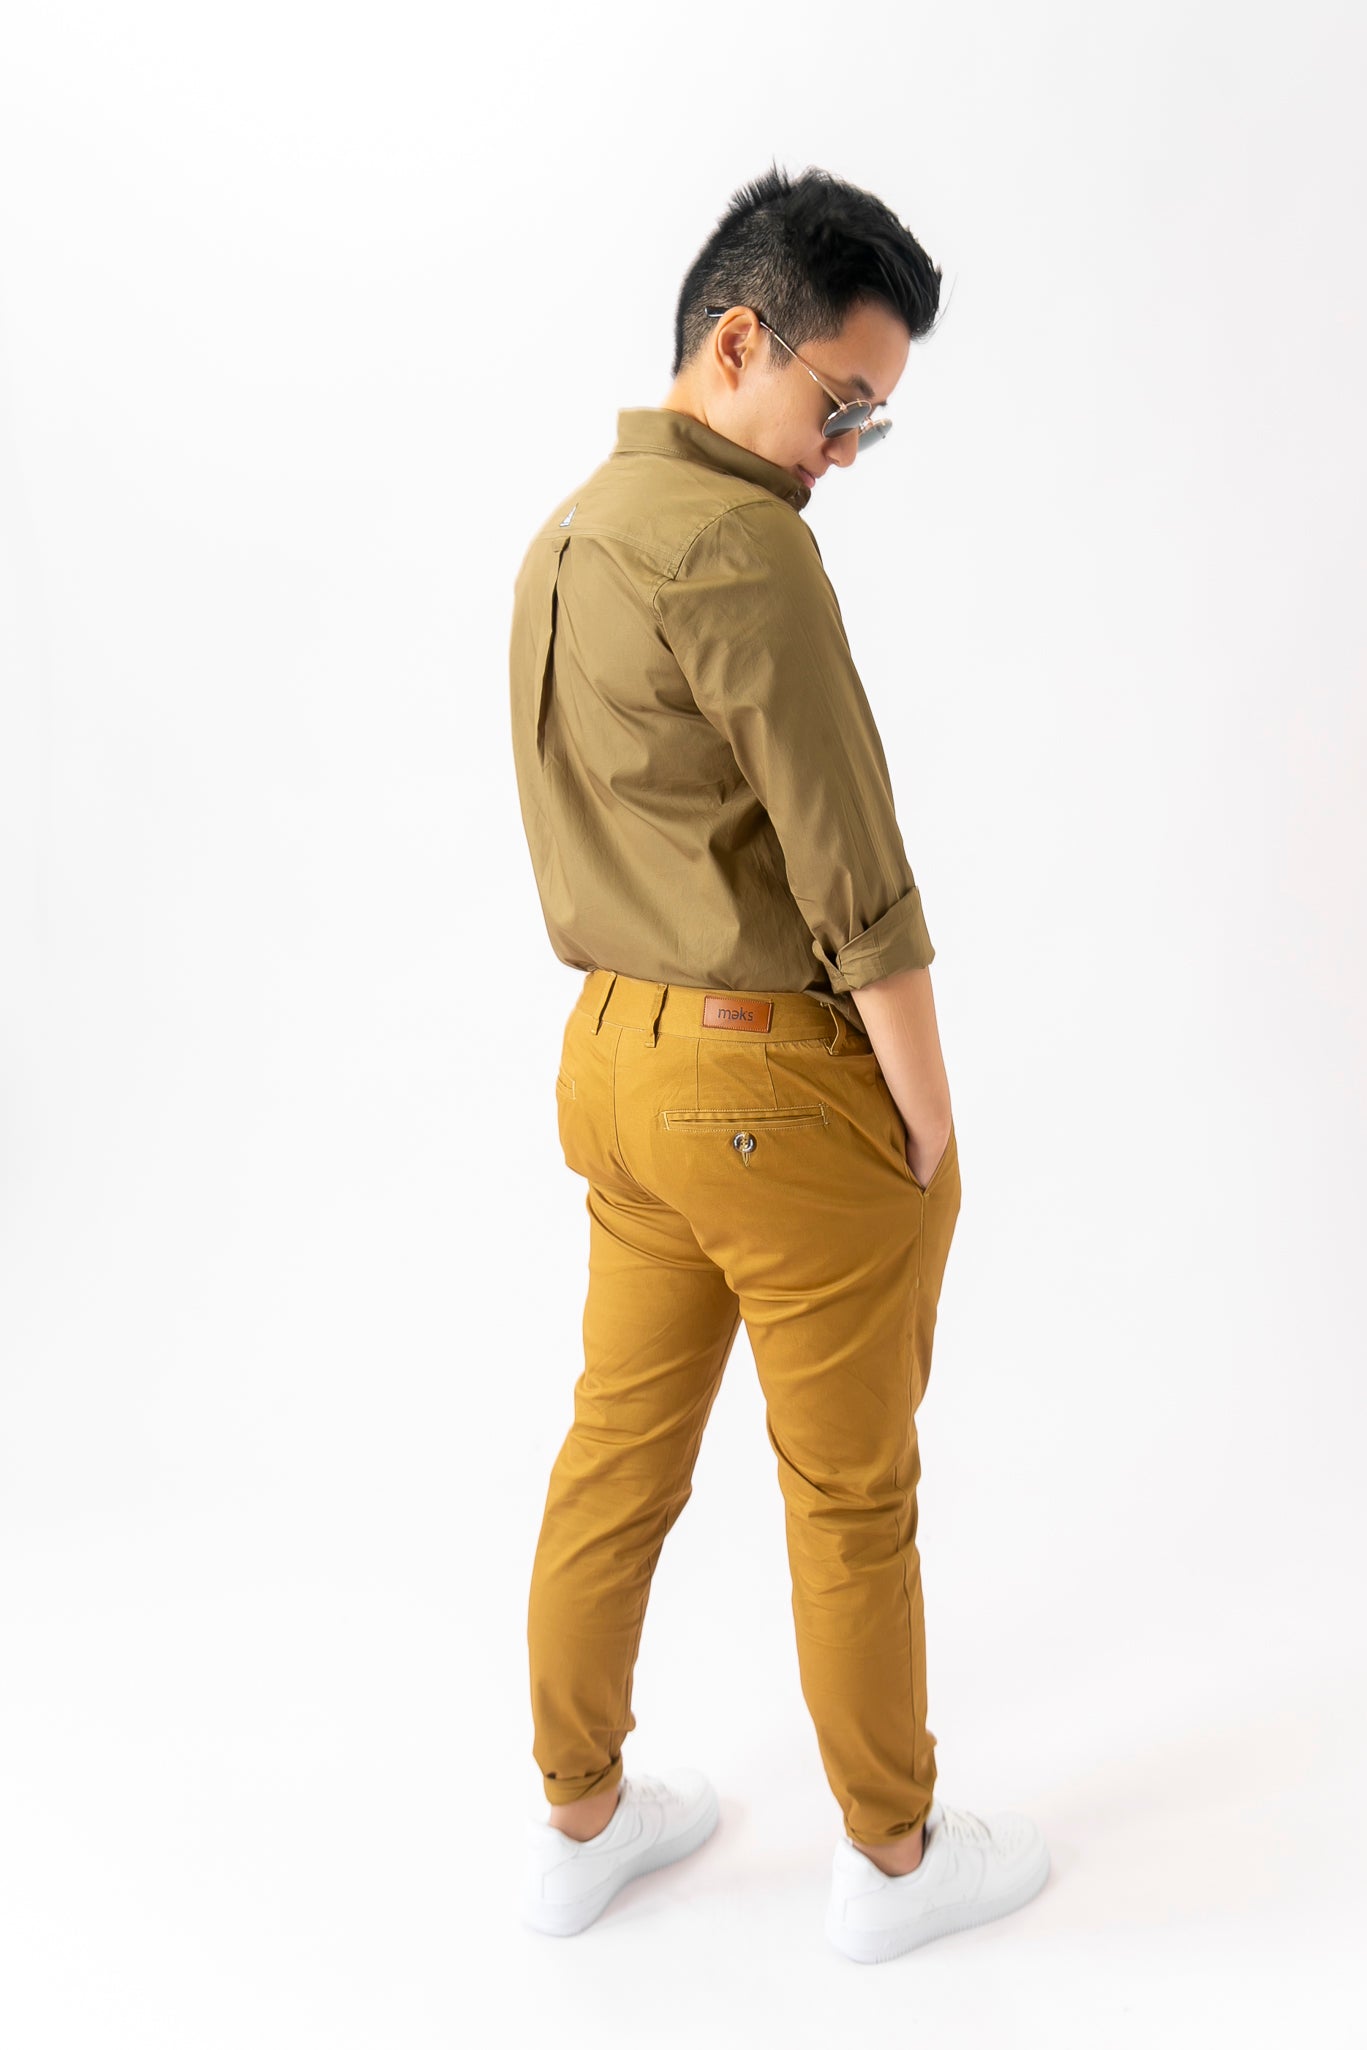 or credits – exchanges - No items Meks Signature on sale Chinos Tan